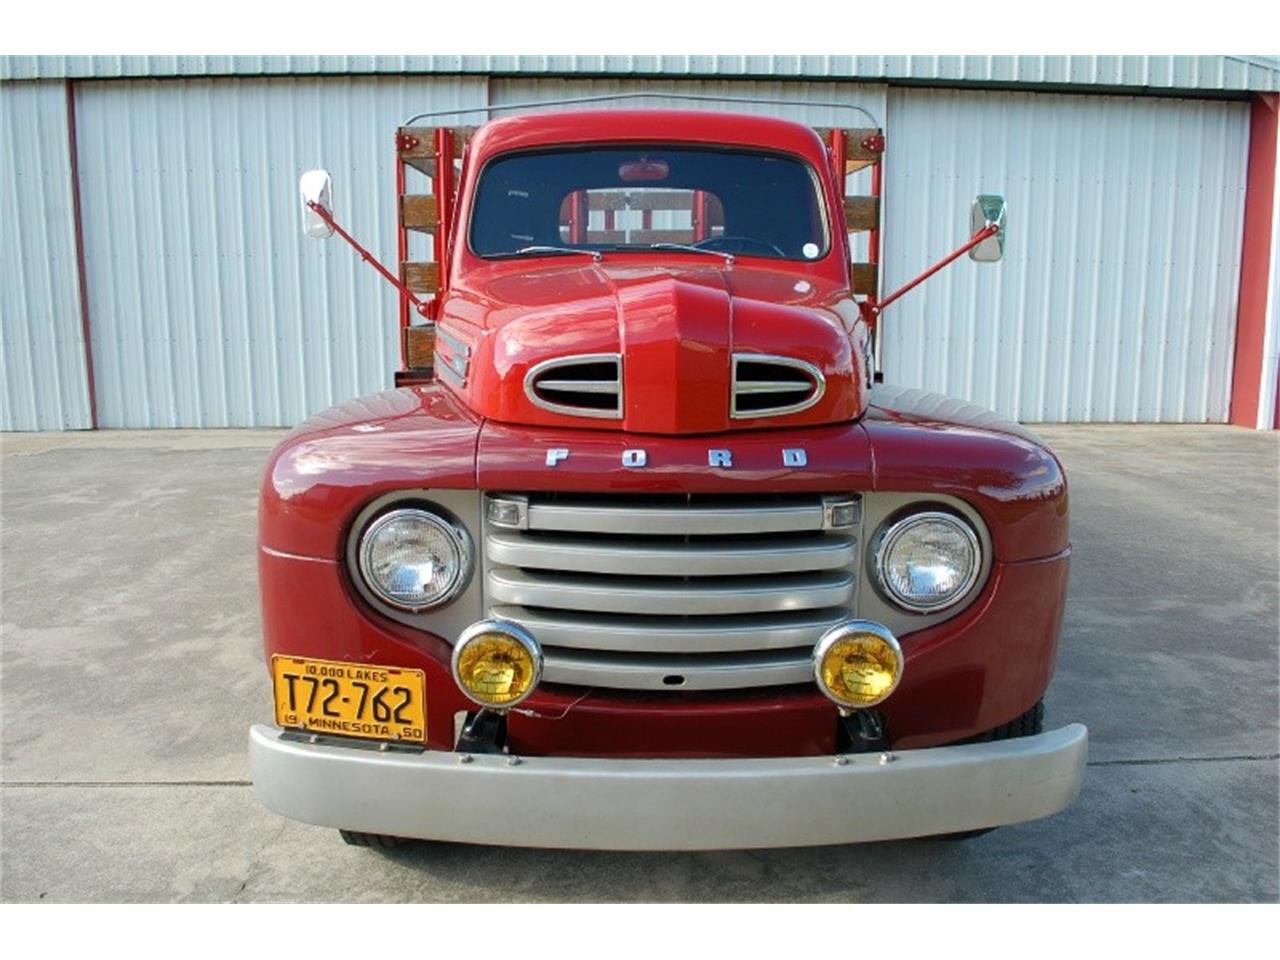 1950 Ford Flatbed Truck for Sale | www.bagssaleusa.com | CC-1199022